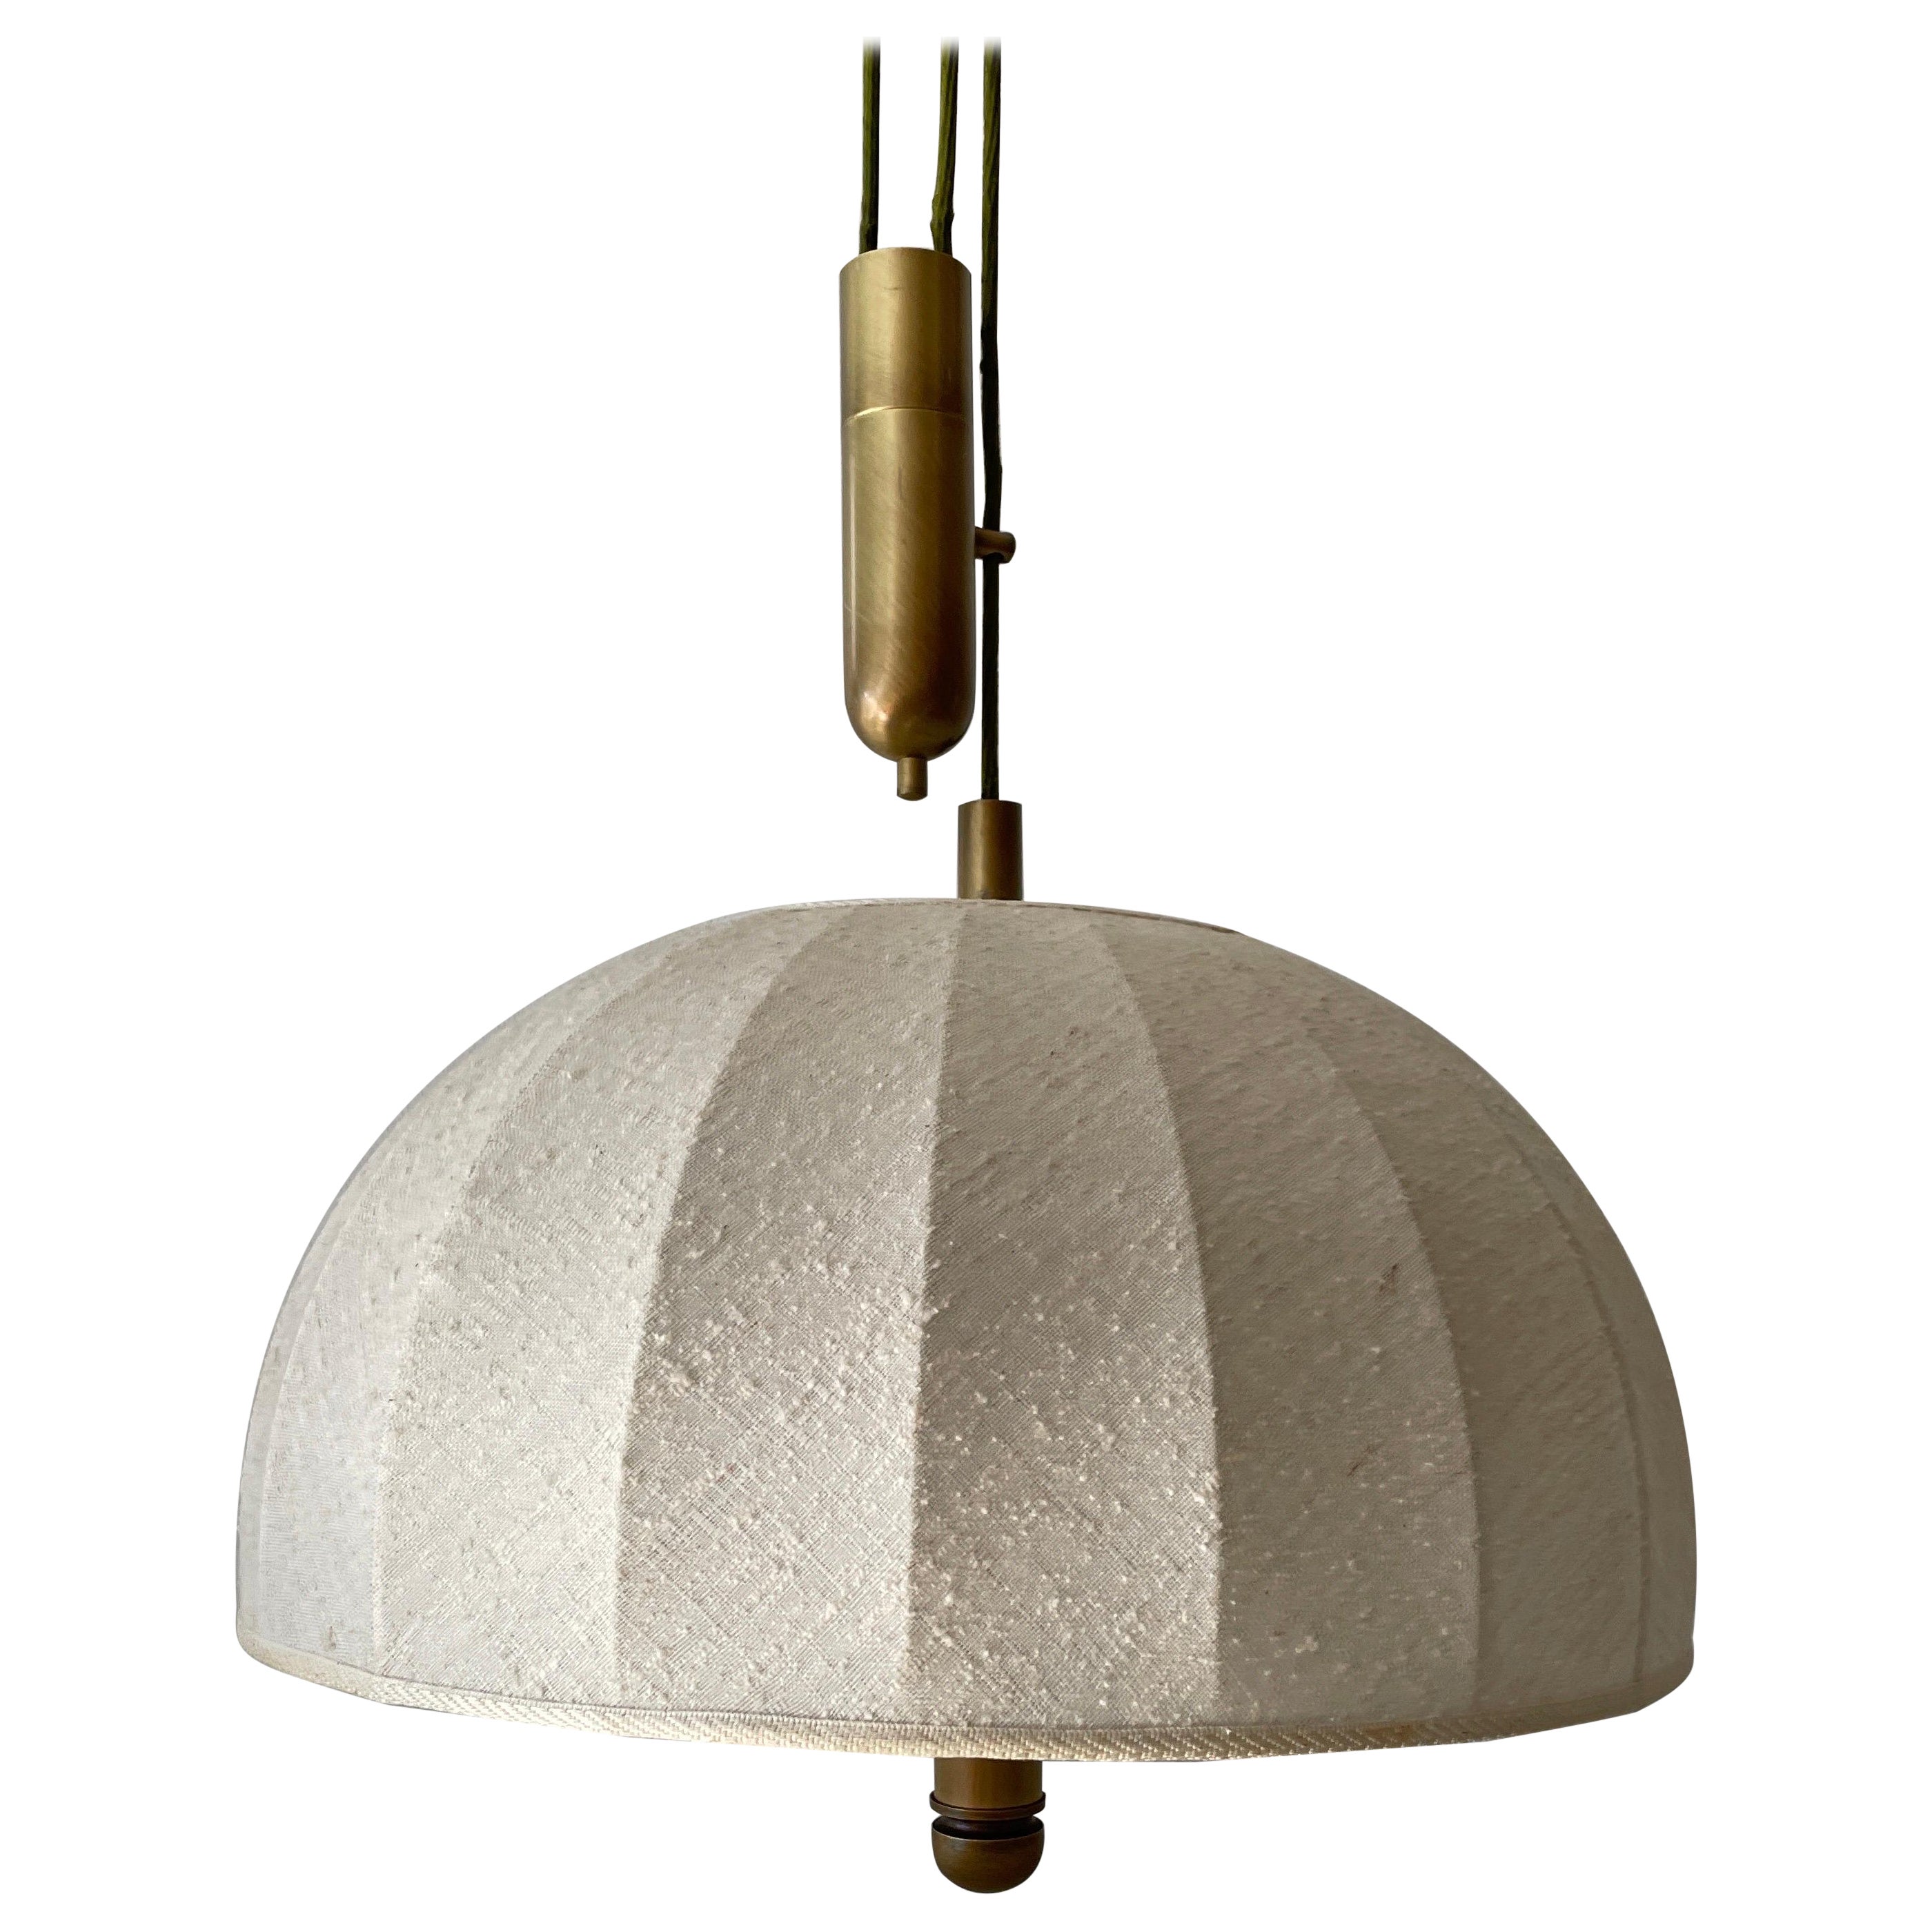 Brass & Fabric Shade Counterweight Pendant Lamp by Wkr, 1970s, Germany